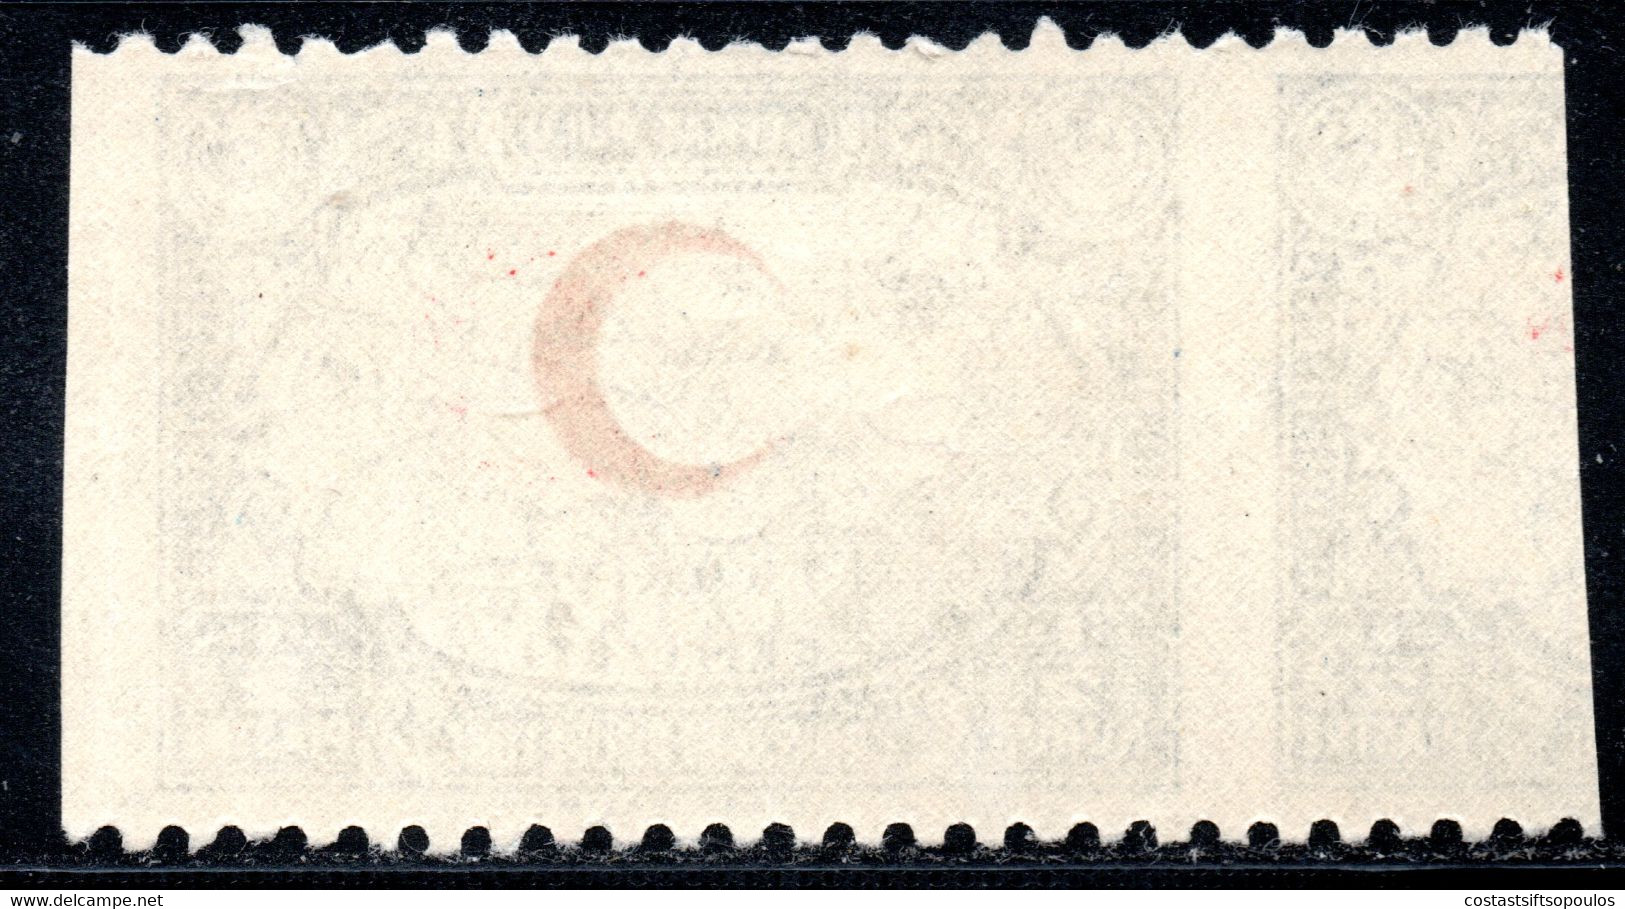 1010.TURKEY,1935 RED CRESCENT,MAP MICH.27A,SC.RA 23 IMPERF.VERTICALLY,MNH,UNRECORDED - Neufs